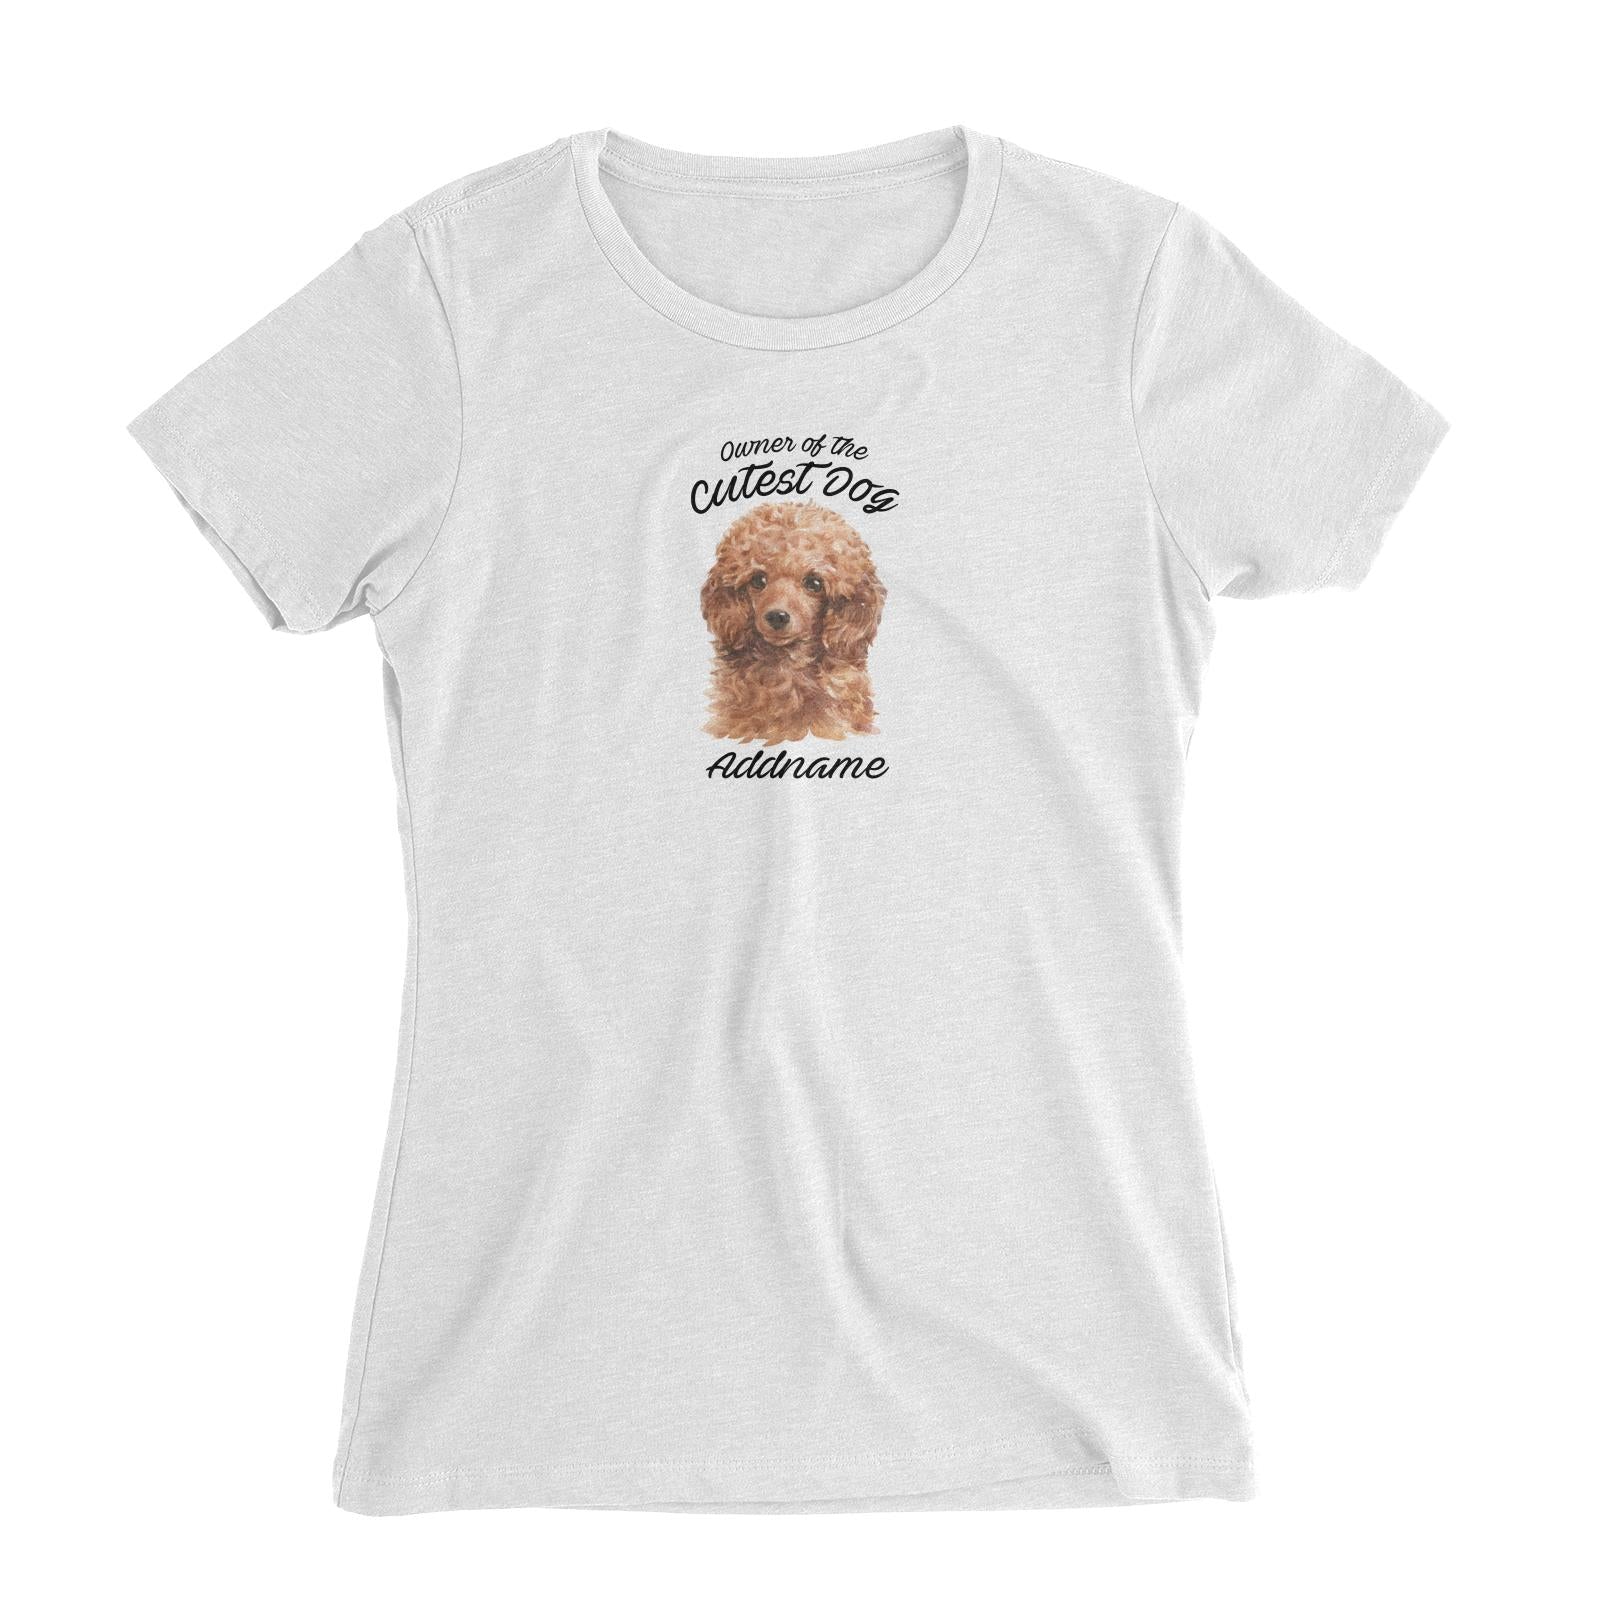 Watercolor Dog Owner Of The Cutest Dog Poodle Brown Addname Women's Slim Fit T-Shirt